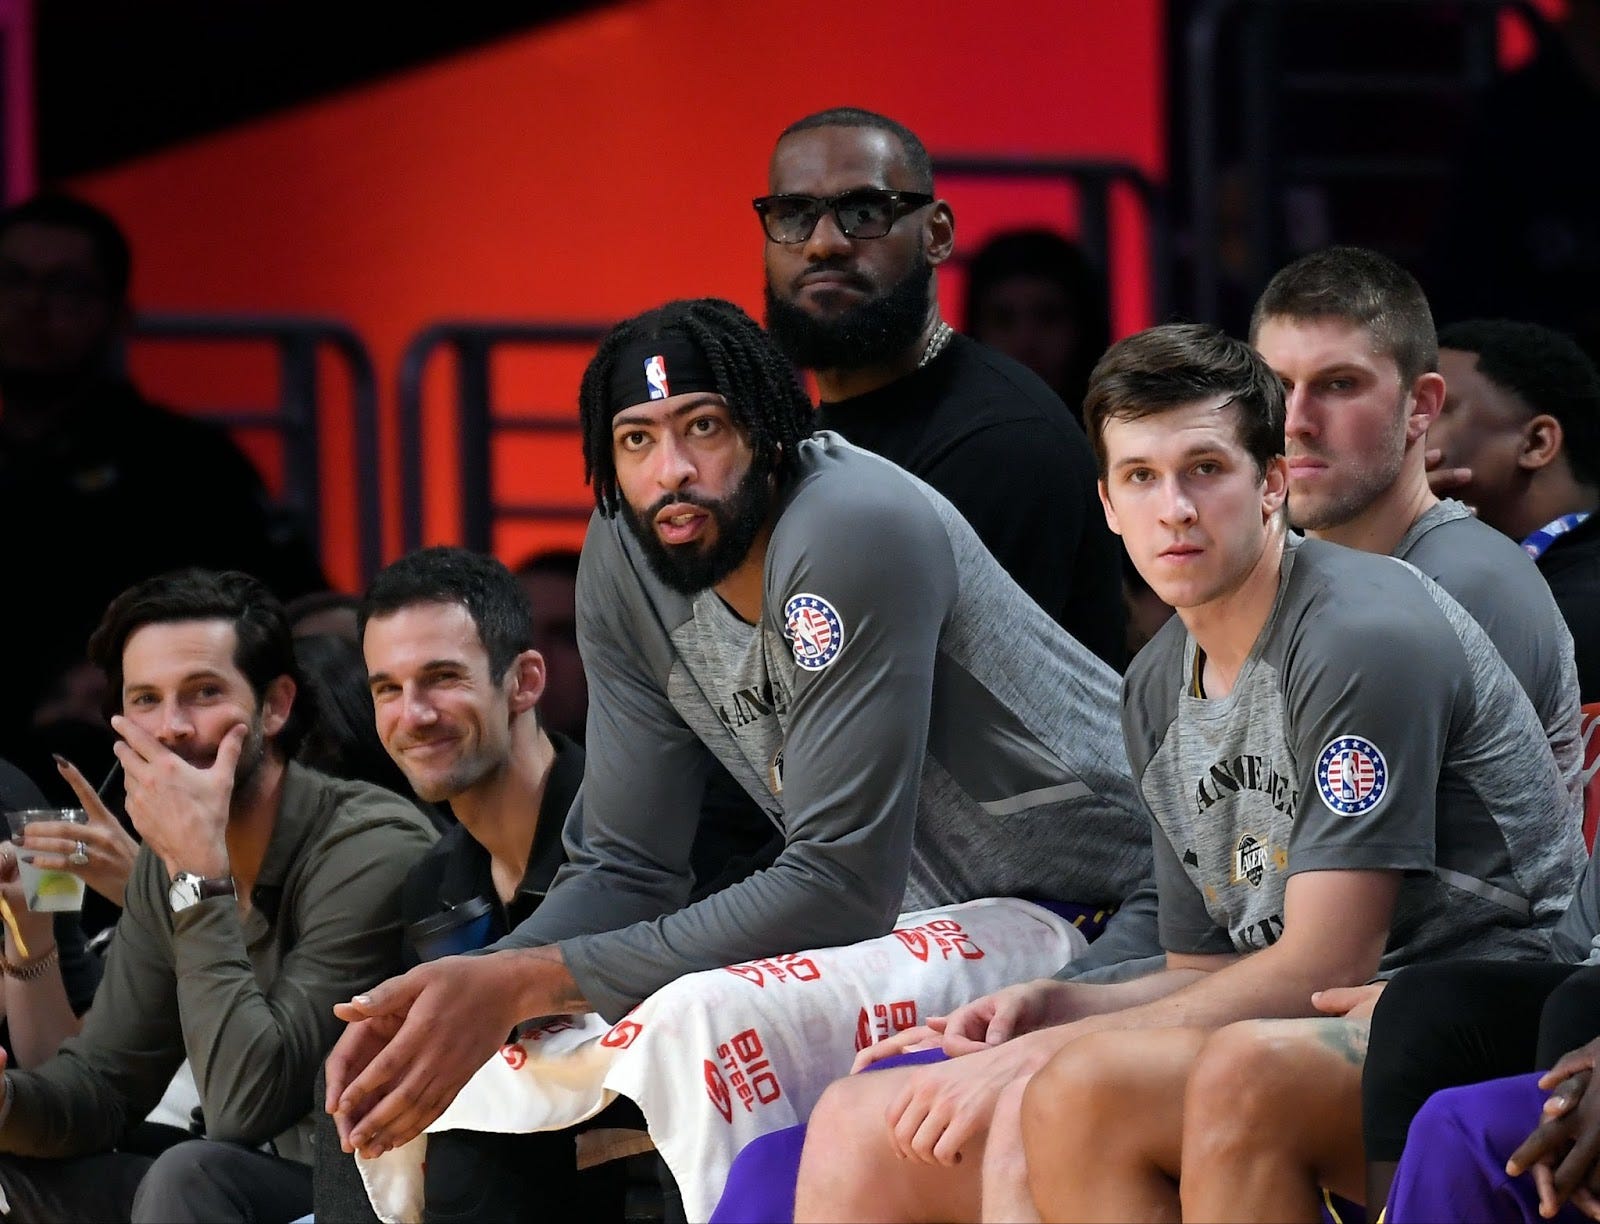 It's not too late for these Lakers - by CoachThorpe